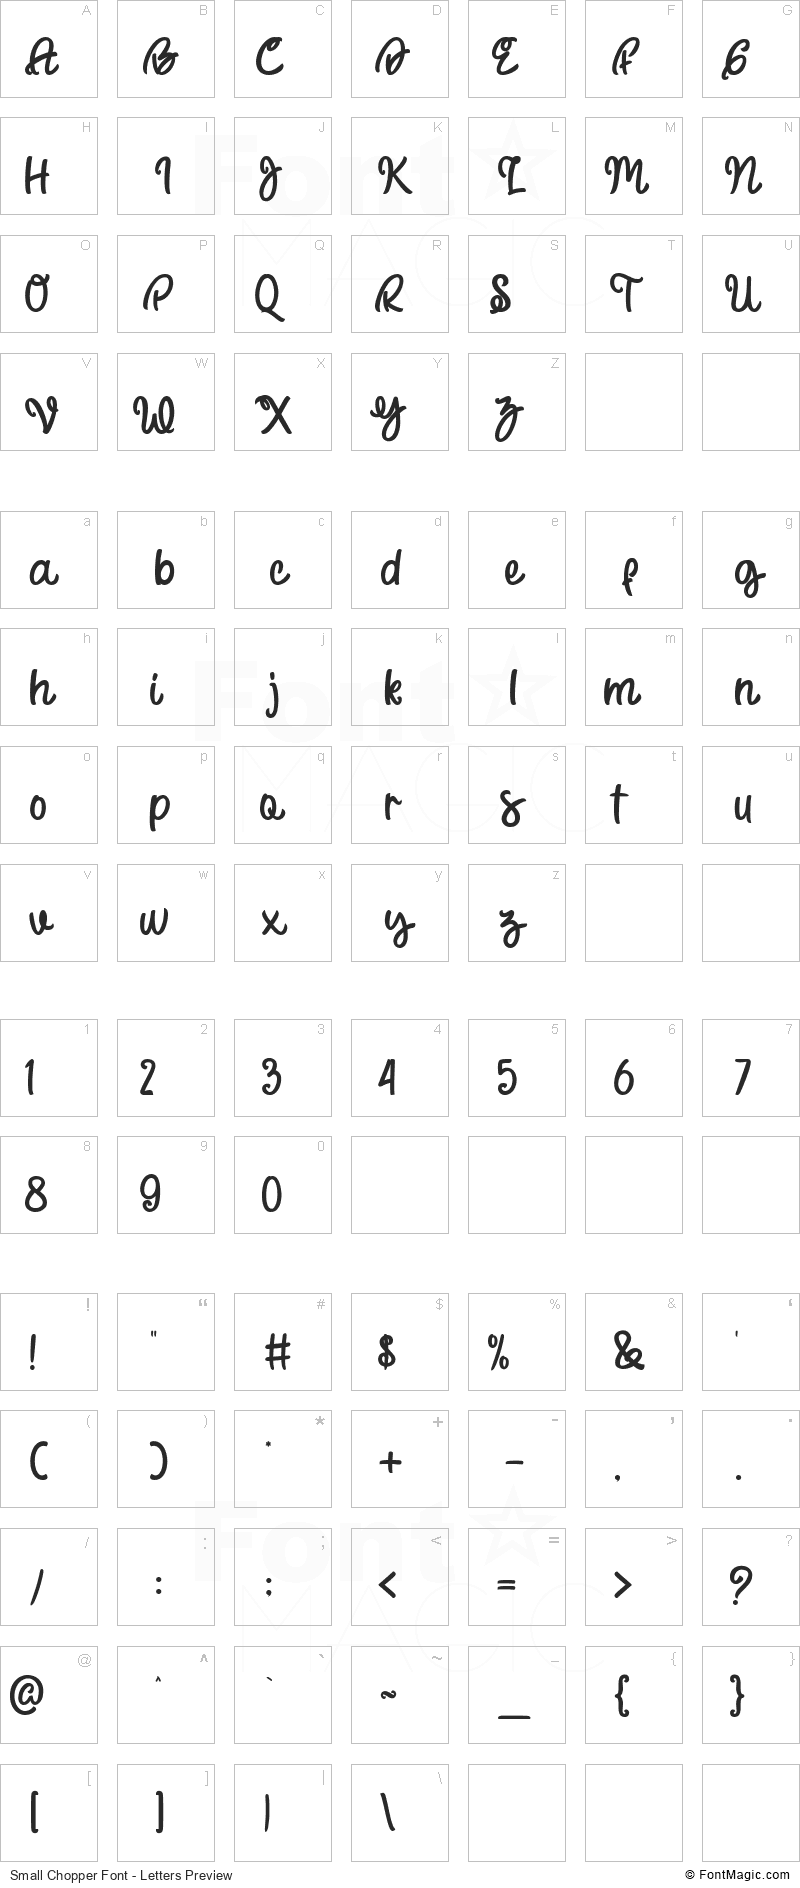 Small Chopper Font - All Latters Preview Chart